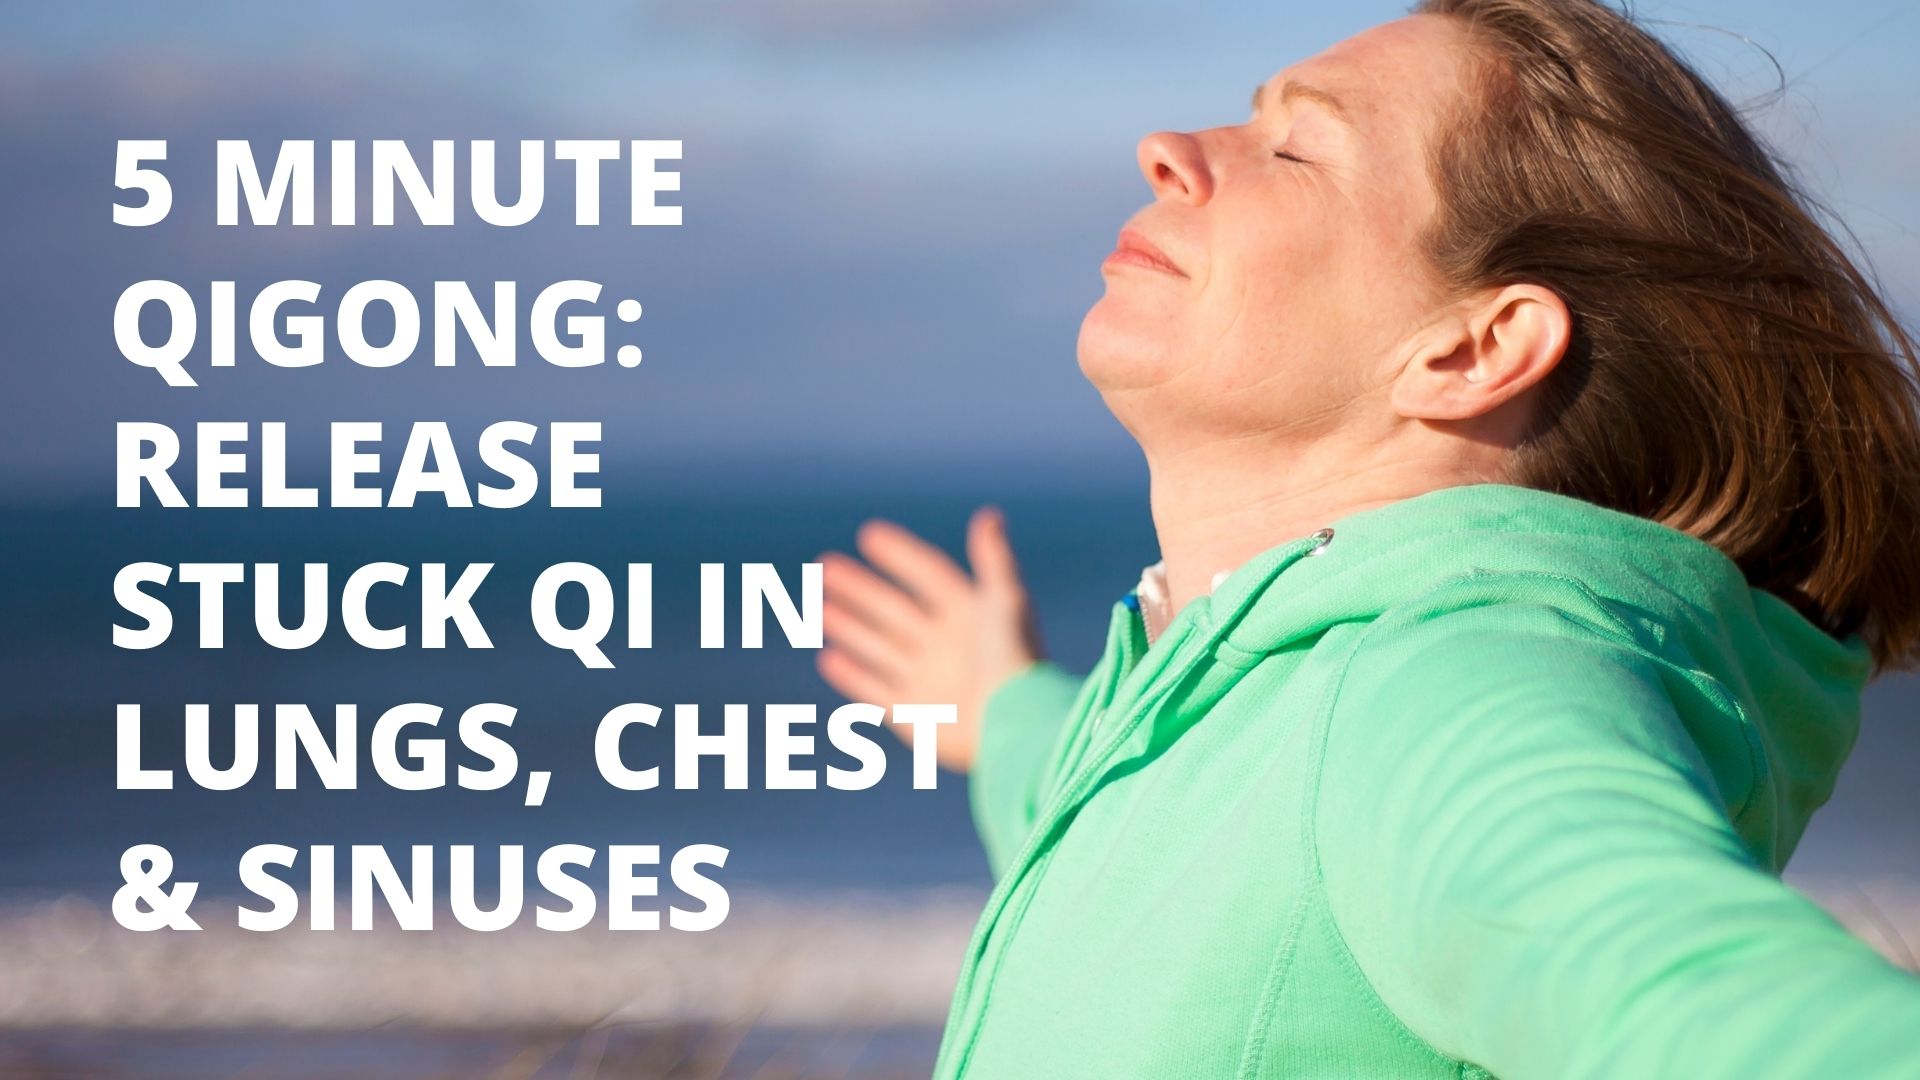 Release Stuck Qi Lungs, Chest & Sinuses 